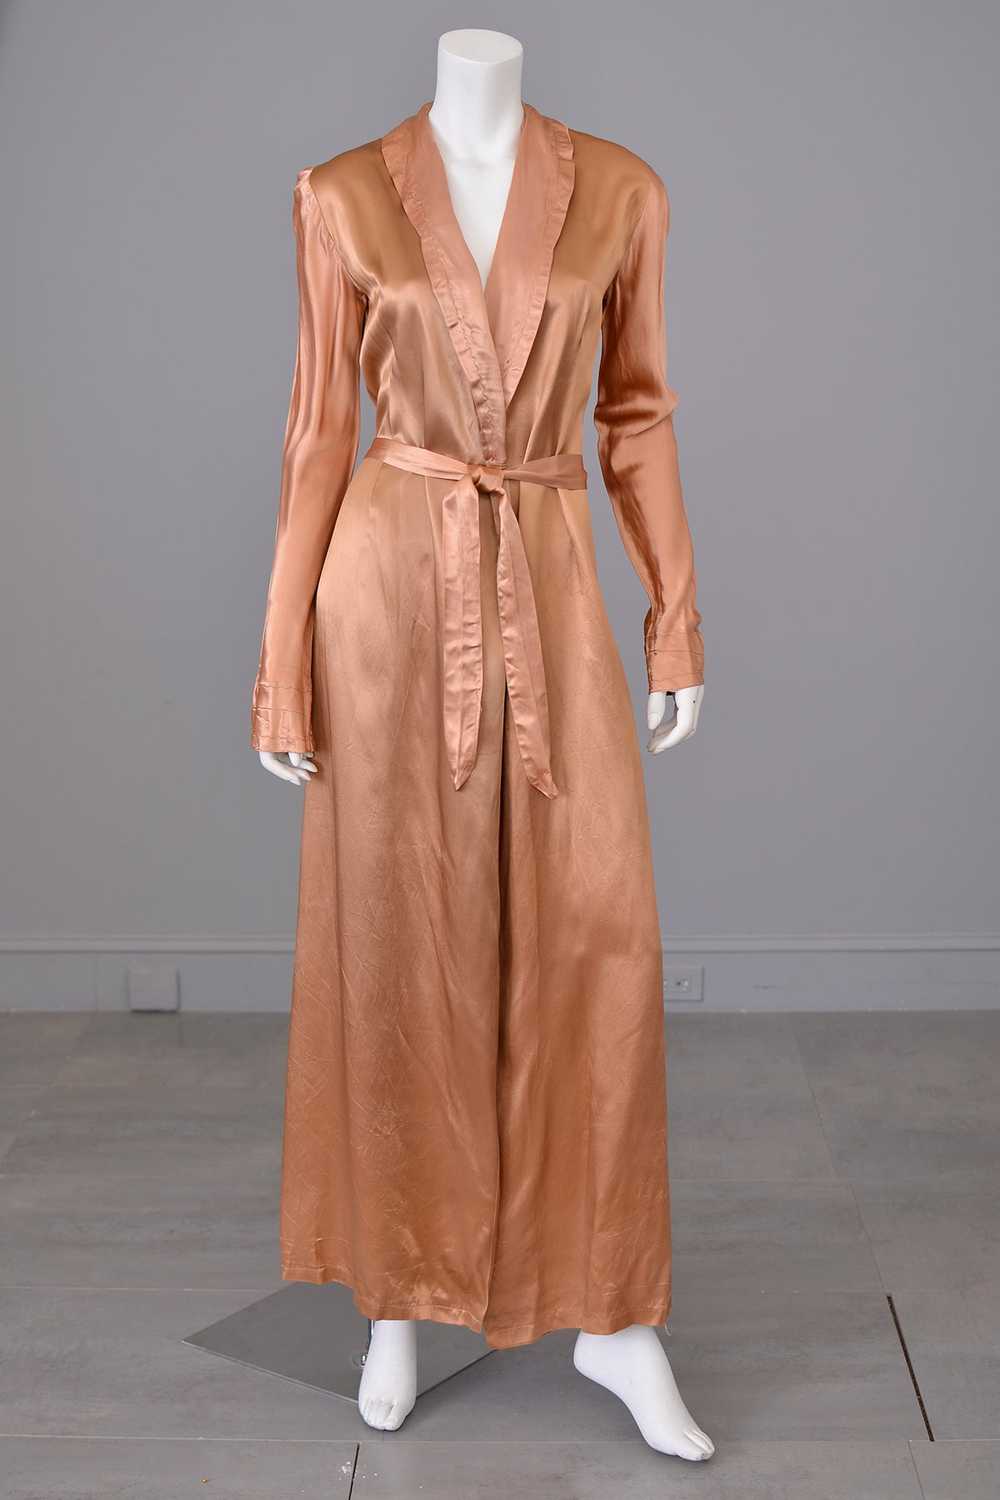 1940s Copper Satin Lounging Robe - image 12